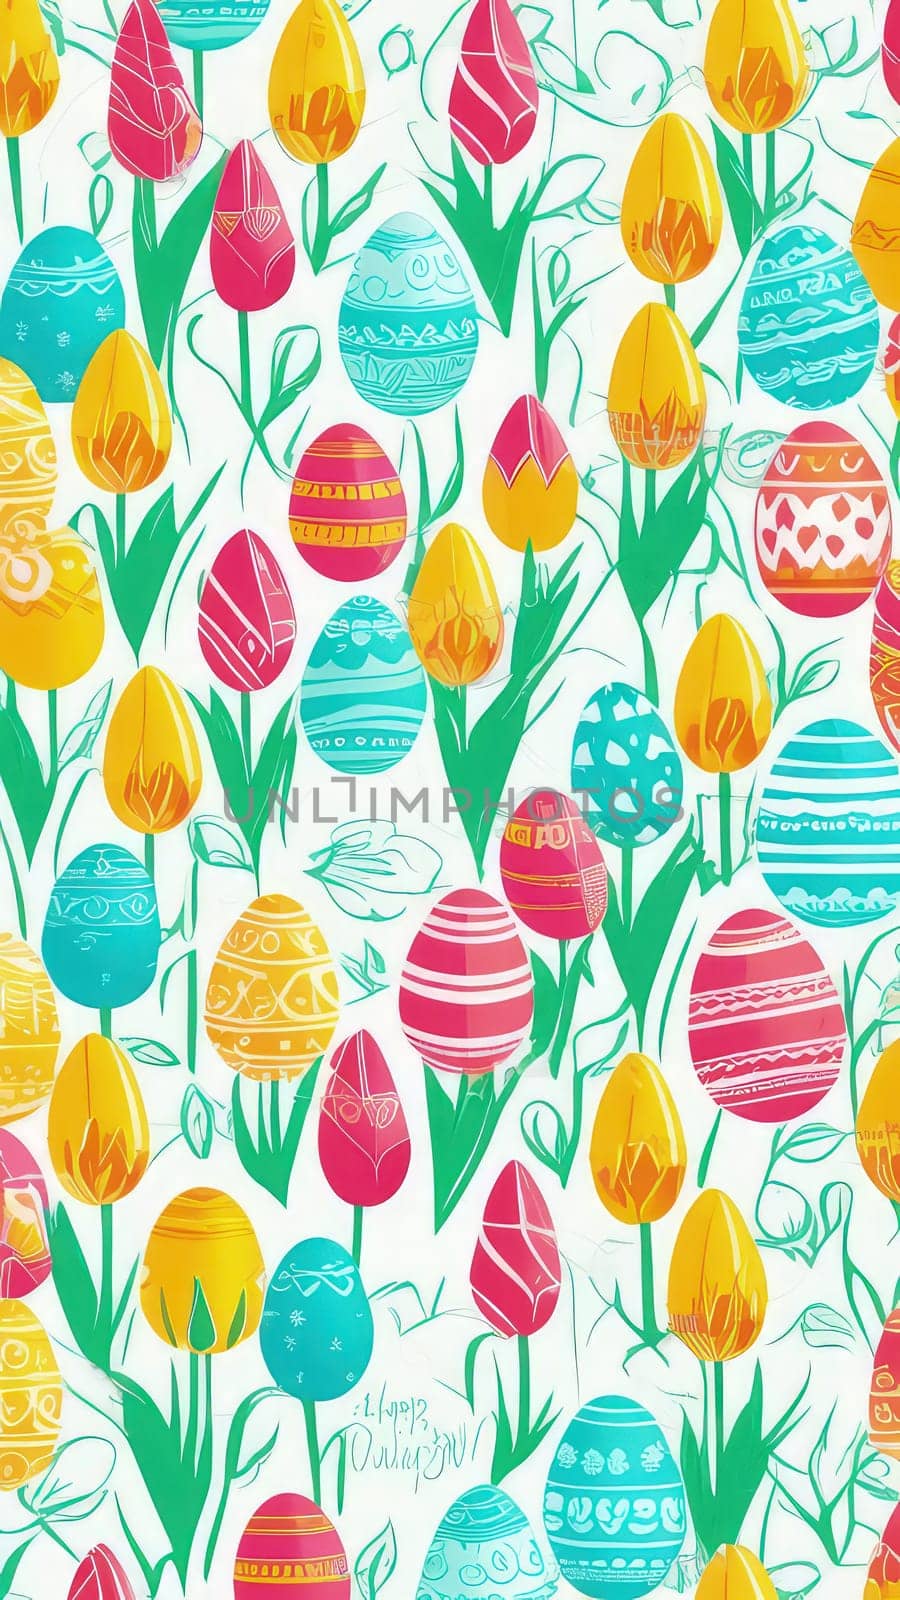 Holiday celebration banner with cute Easter decorated eggs and spring flowers on green spring meadow. Flowers in landscape. Happy Easter greeting card, banner, festive background.Copy space. by Angelsmoon